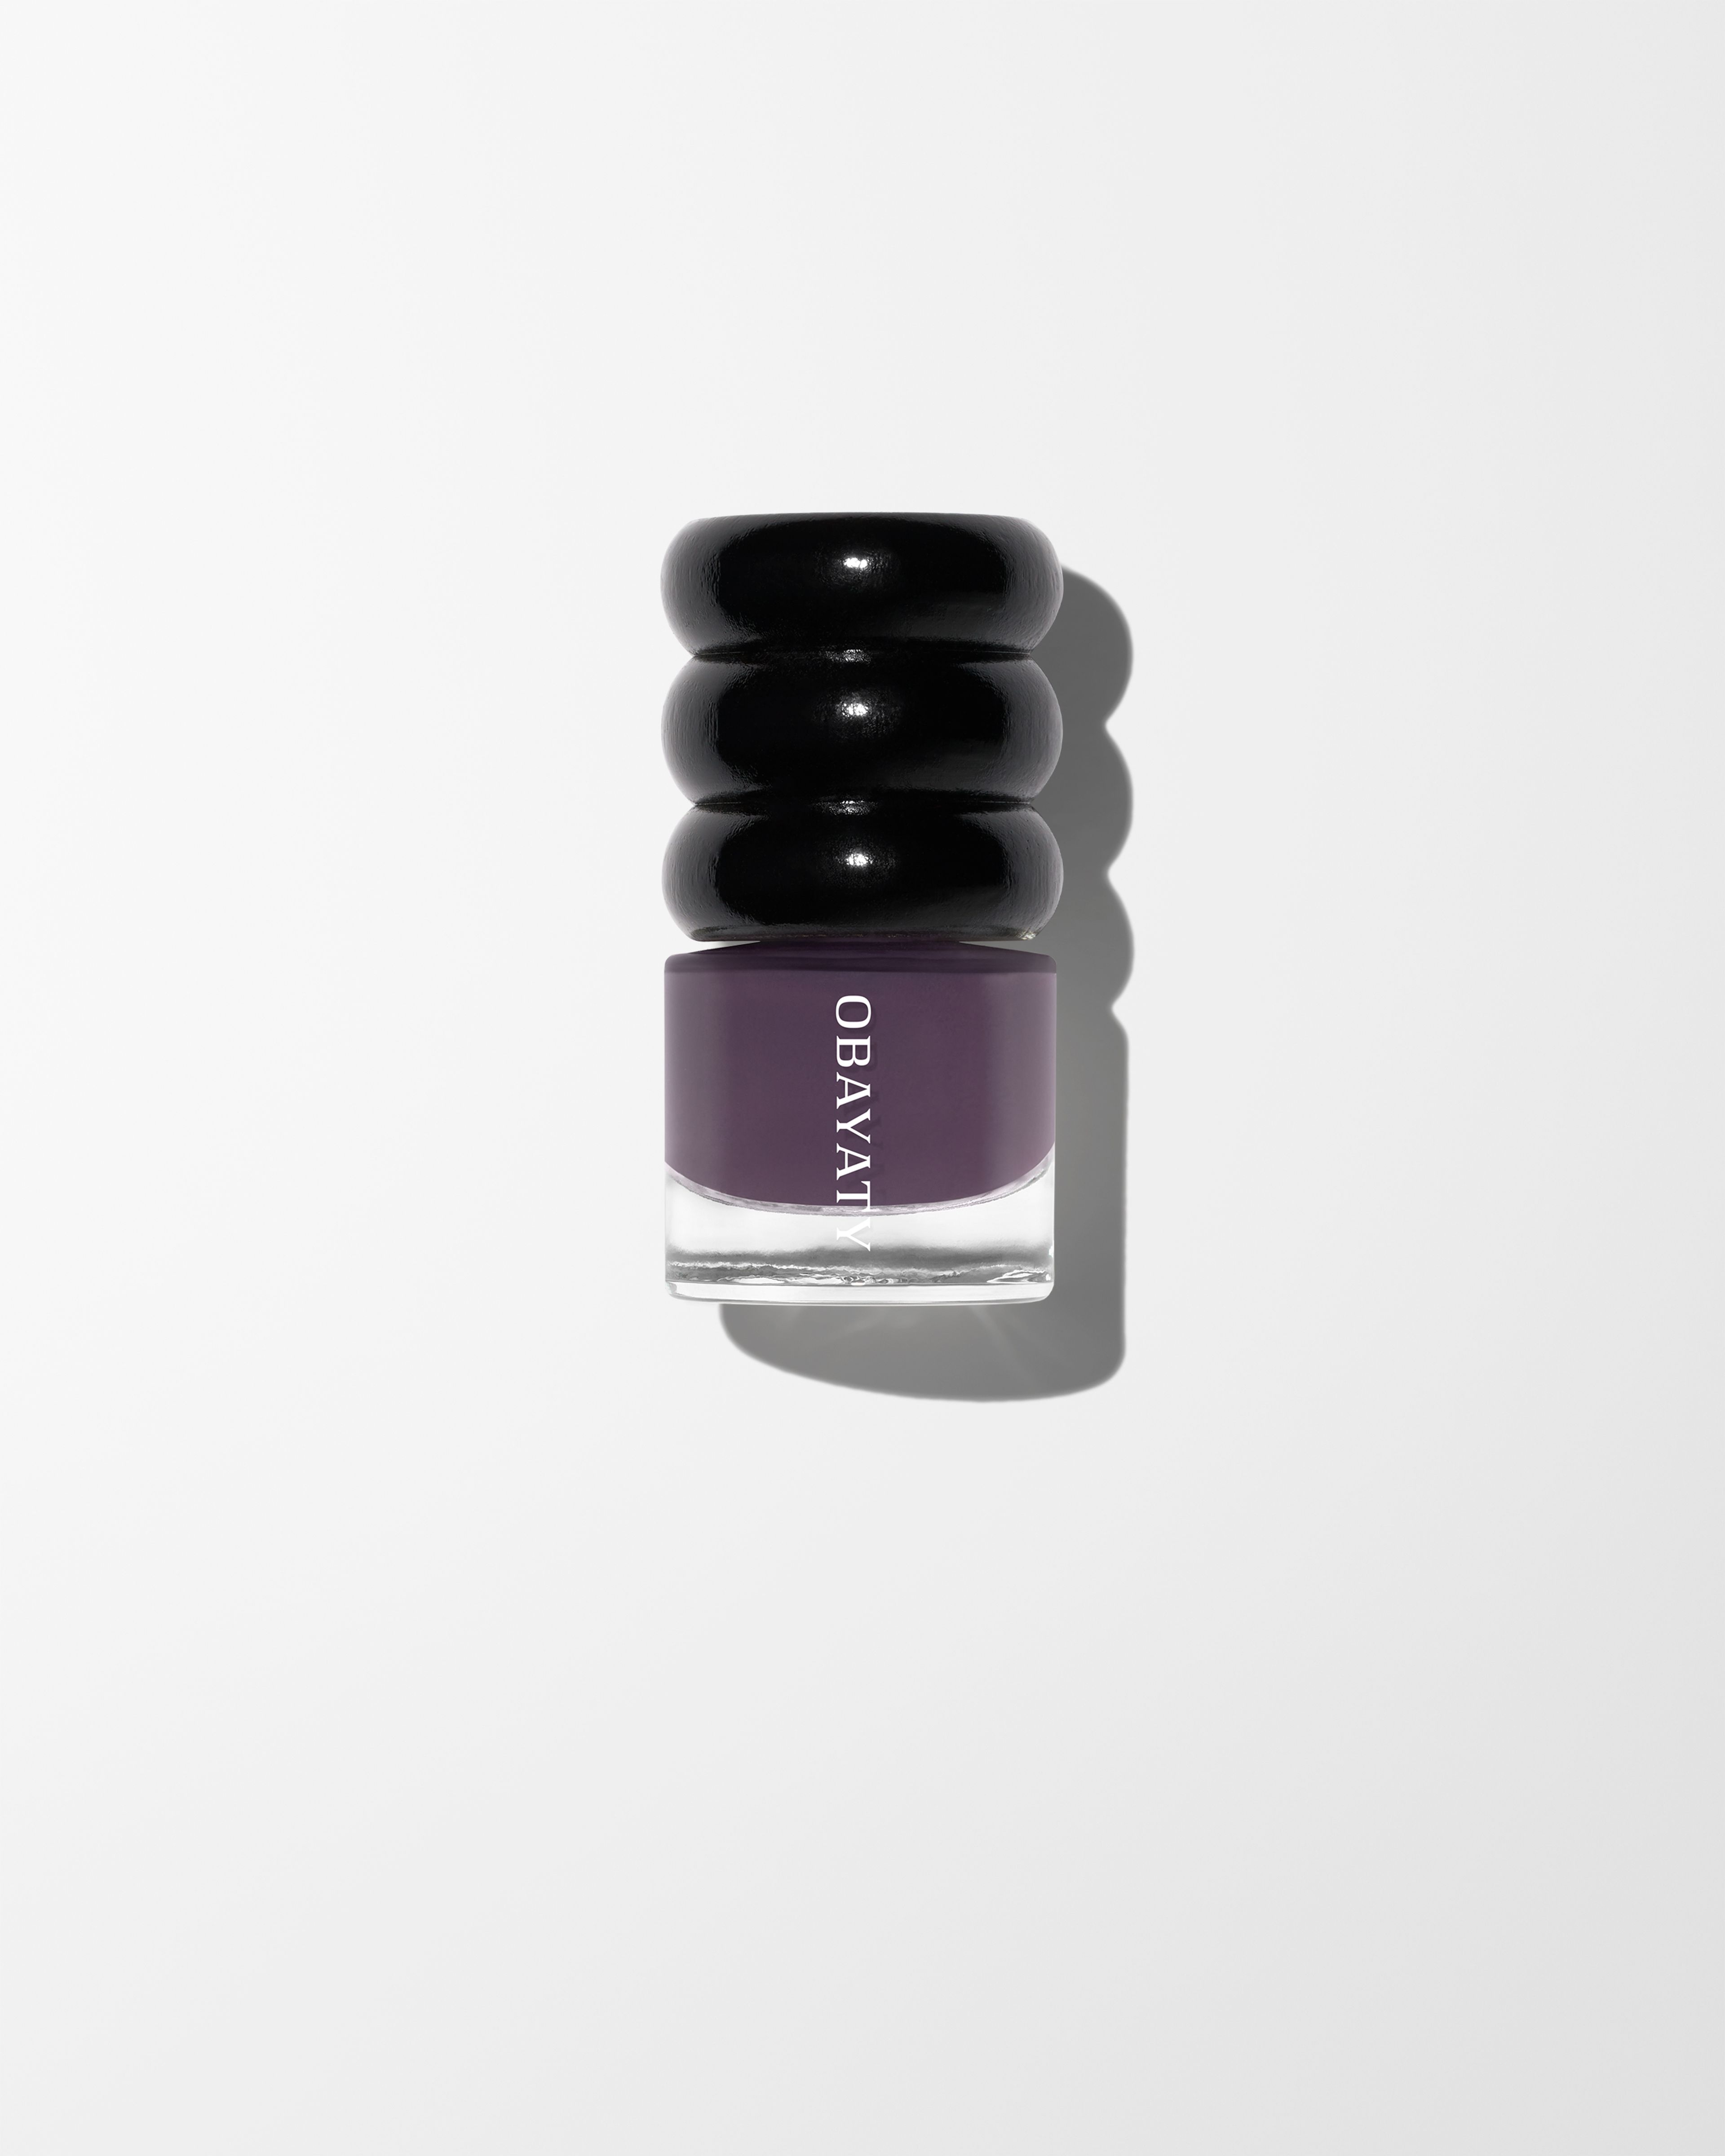 Black wood cap and glass bottle of nail polish in the color Violet Dusk laying on a grey surface